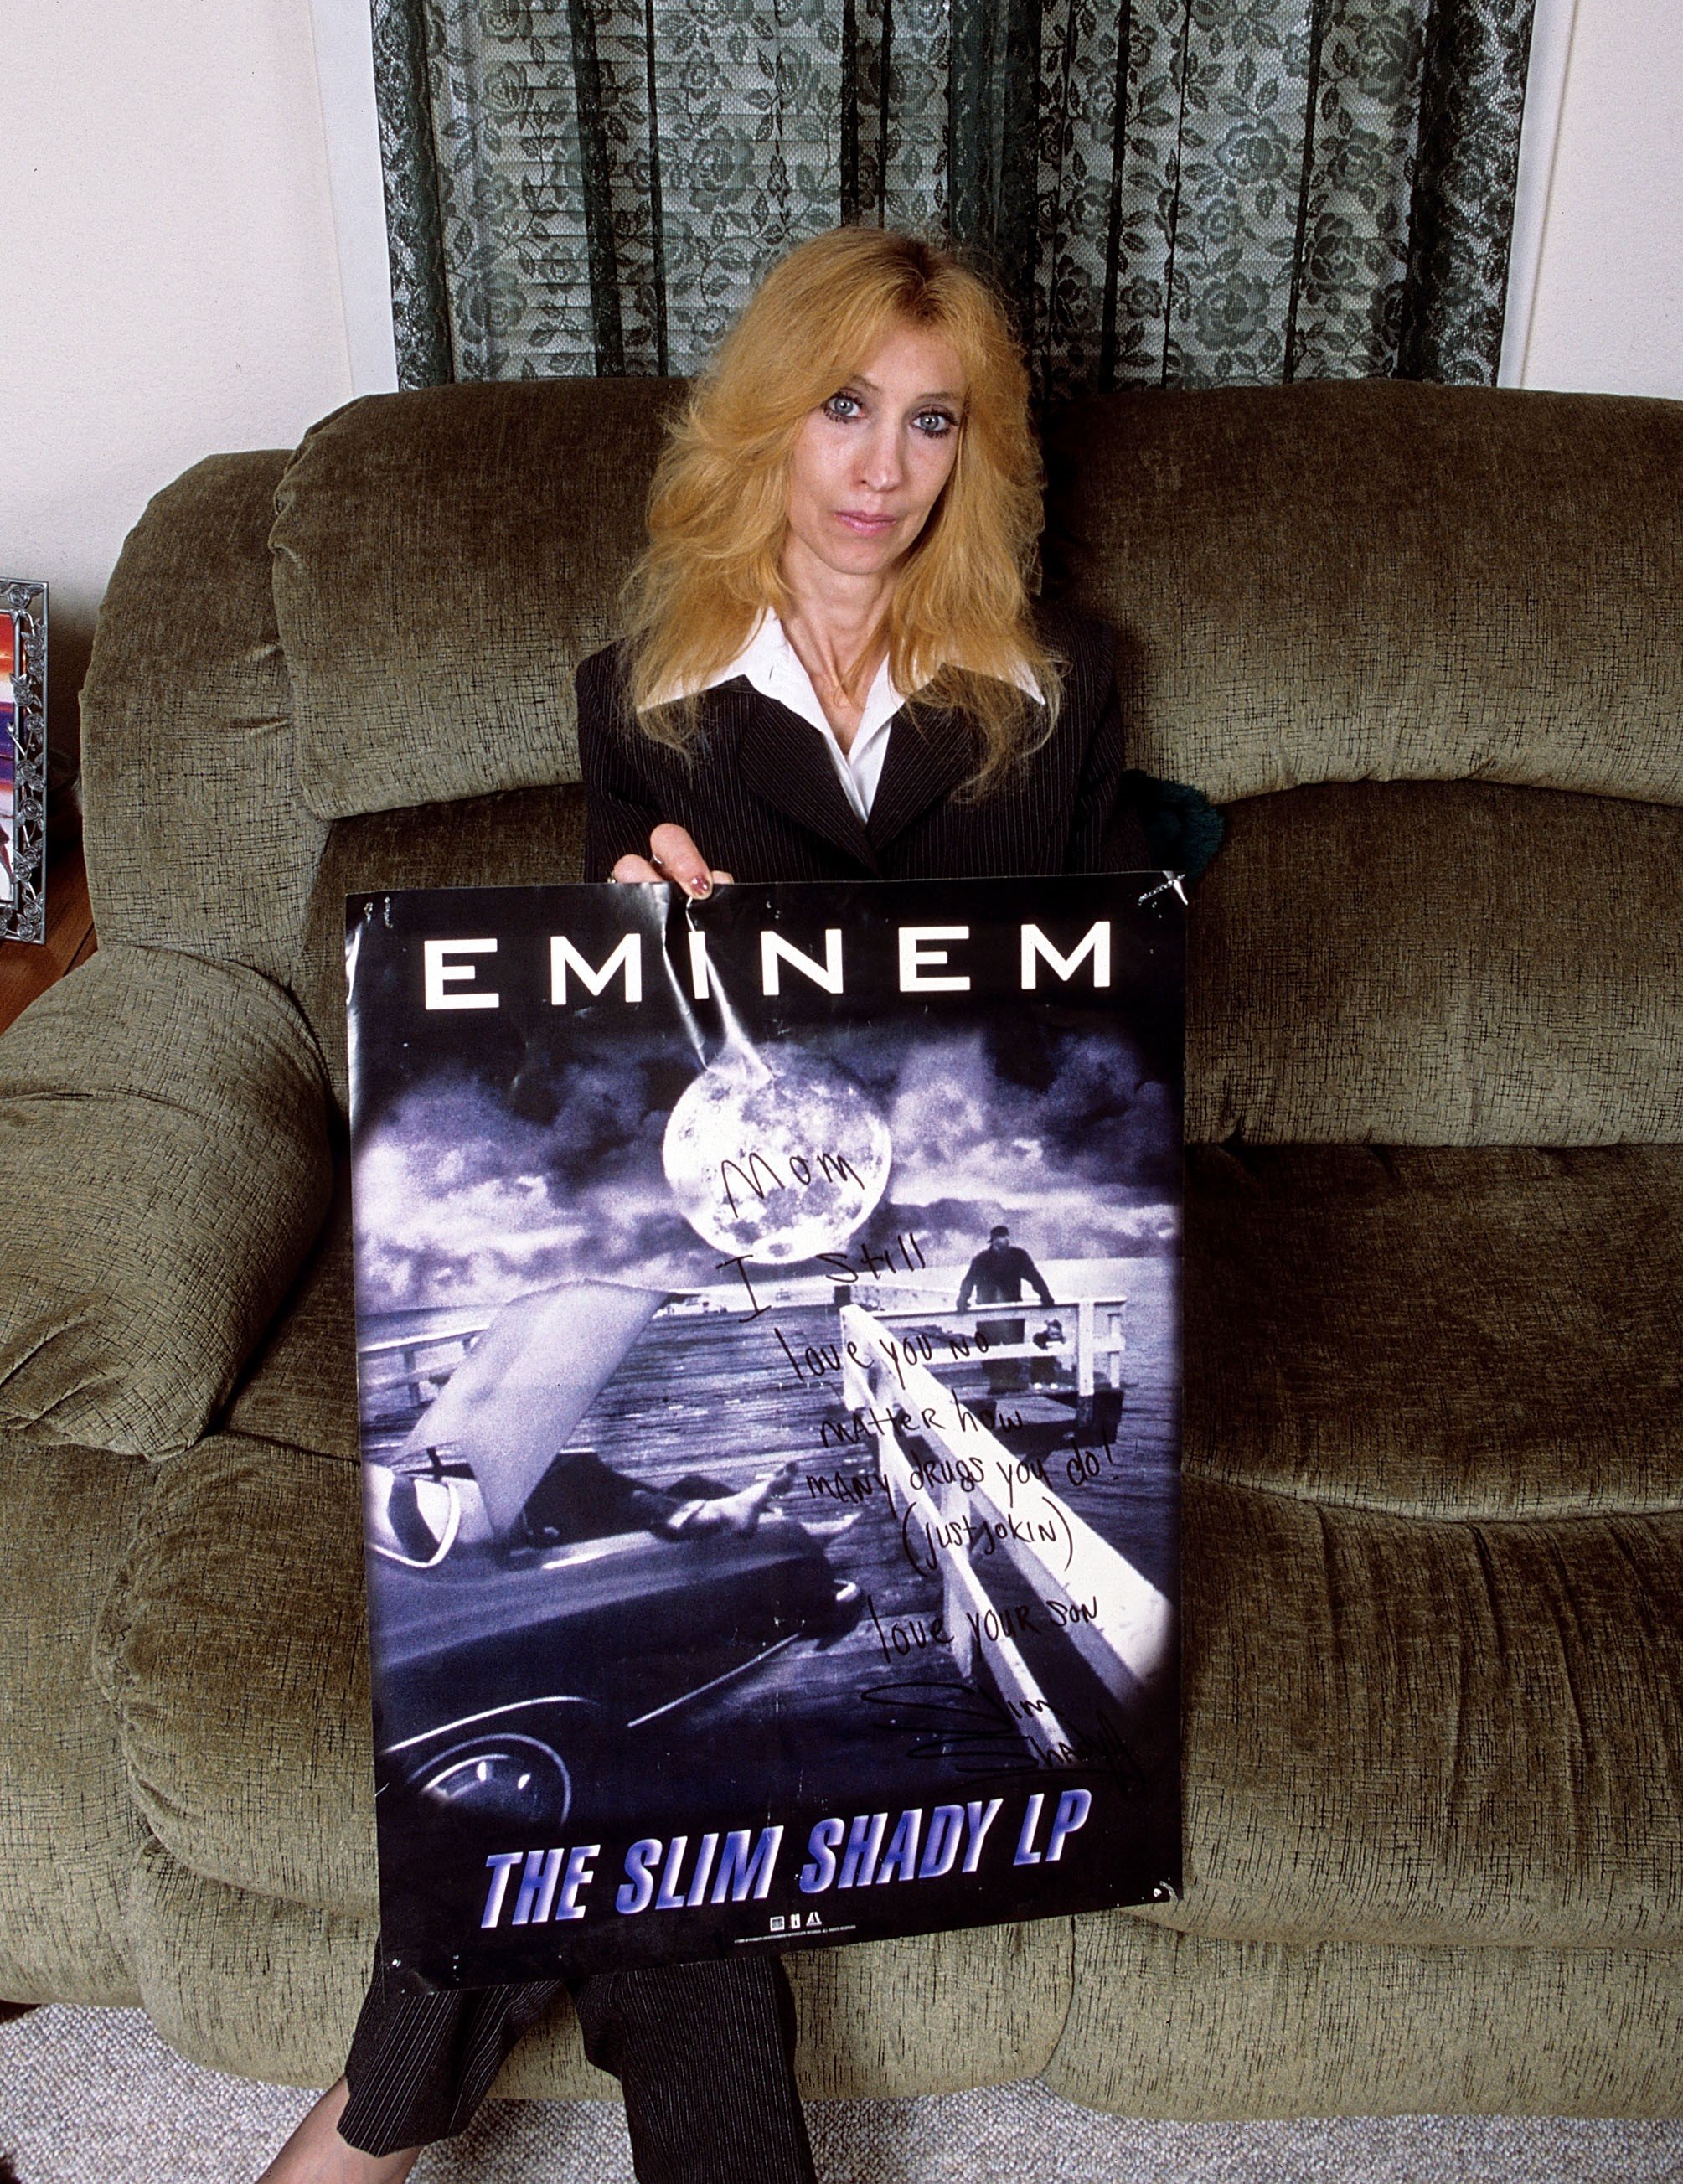 Eminem's mother Debbie Mathers holds a poster with a hand written message during a portrait session at her home